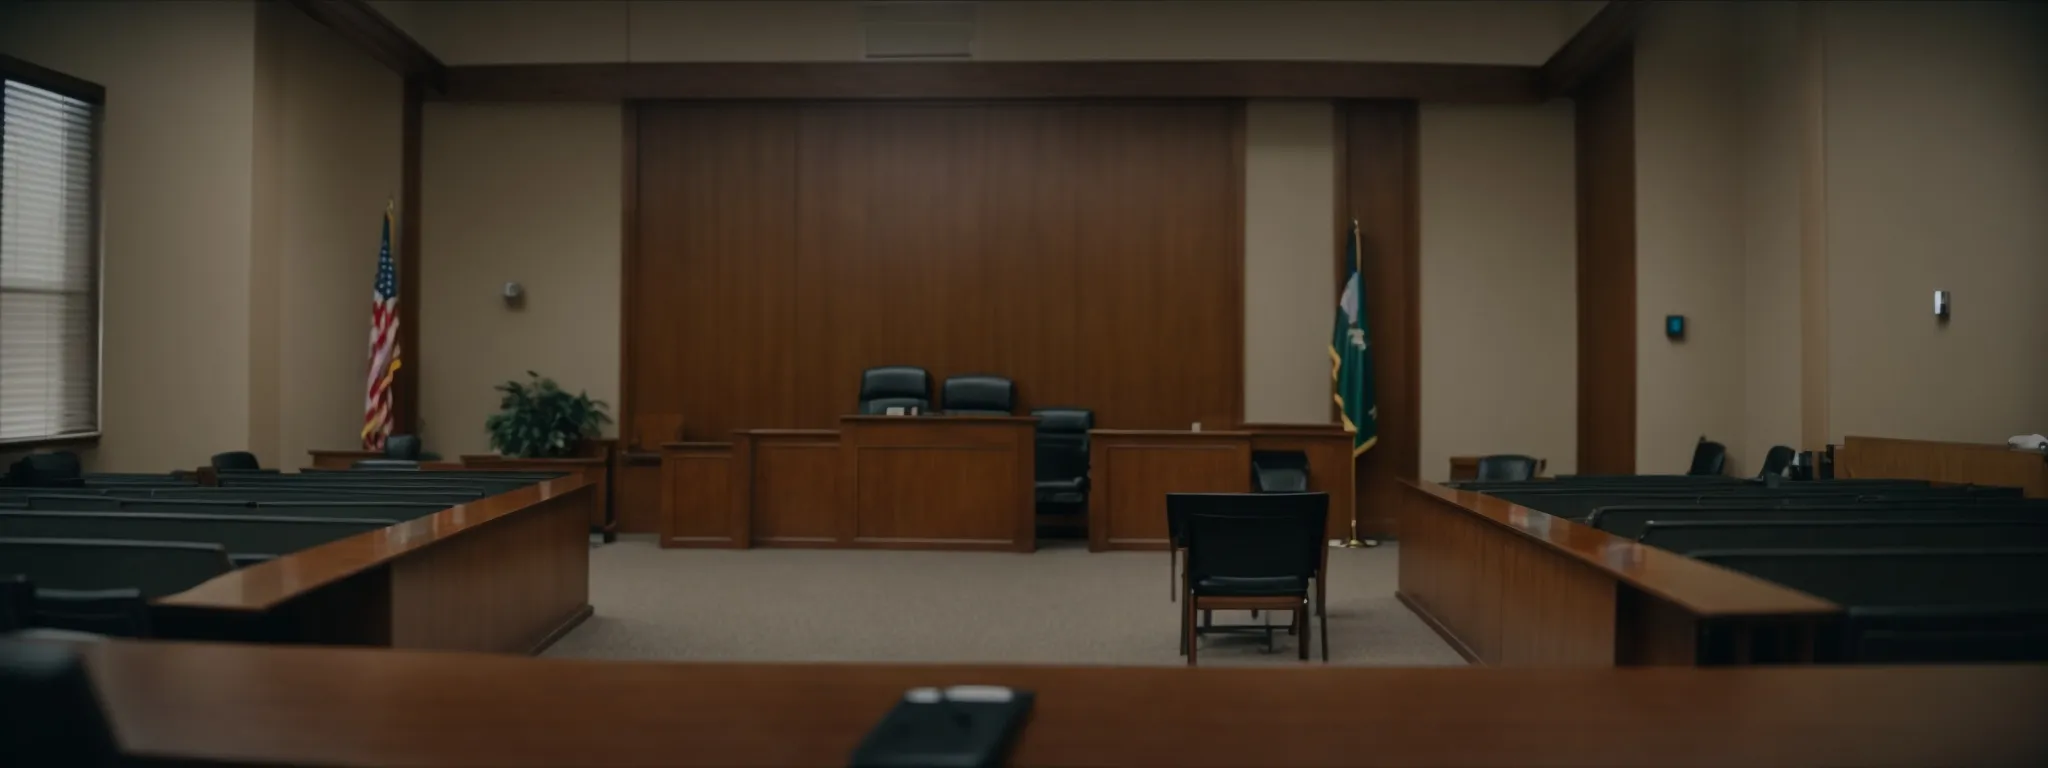 a quiet courtroom in waco, texas, with an unassuming attorney consulting with a client by an empty judge's bench.